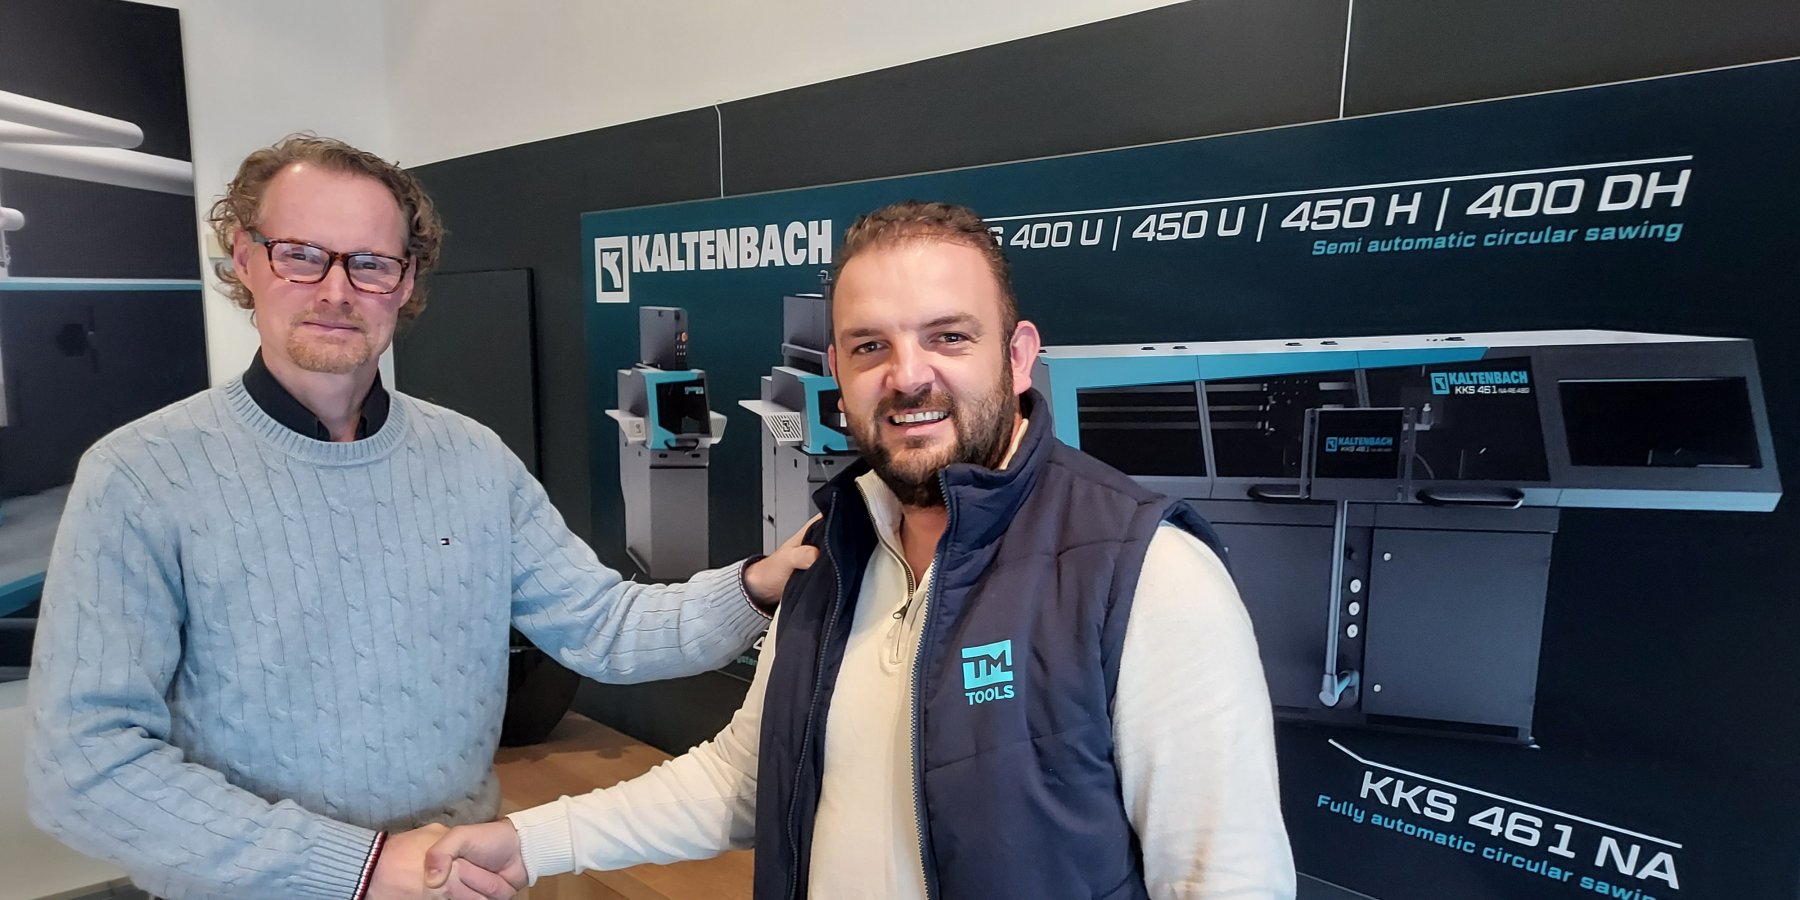 TM-TOOLS – New dealer for KALTENBACH circular saws in the BENELUX